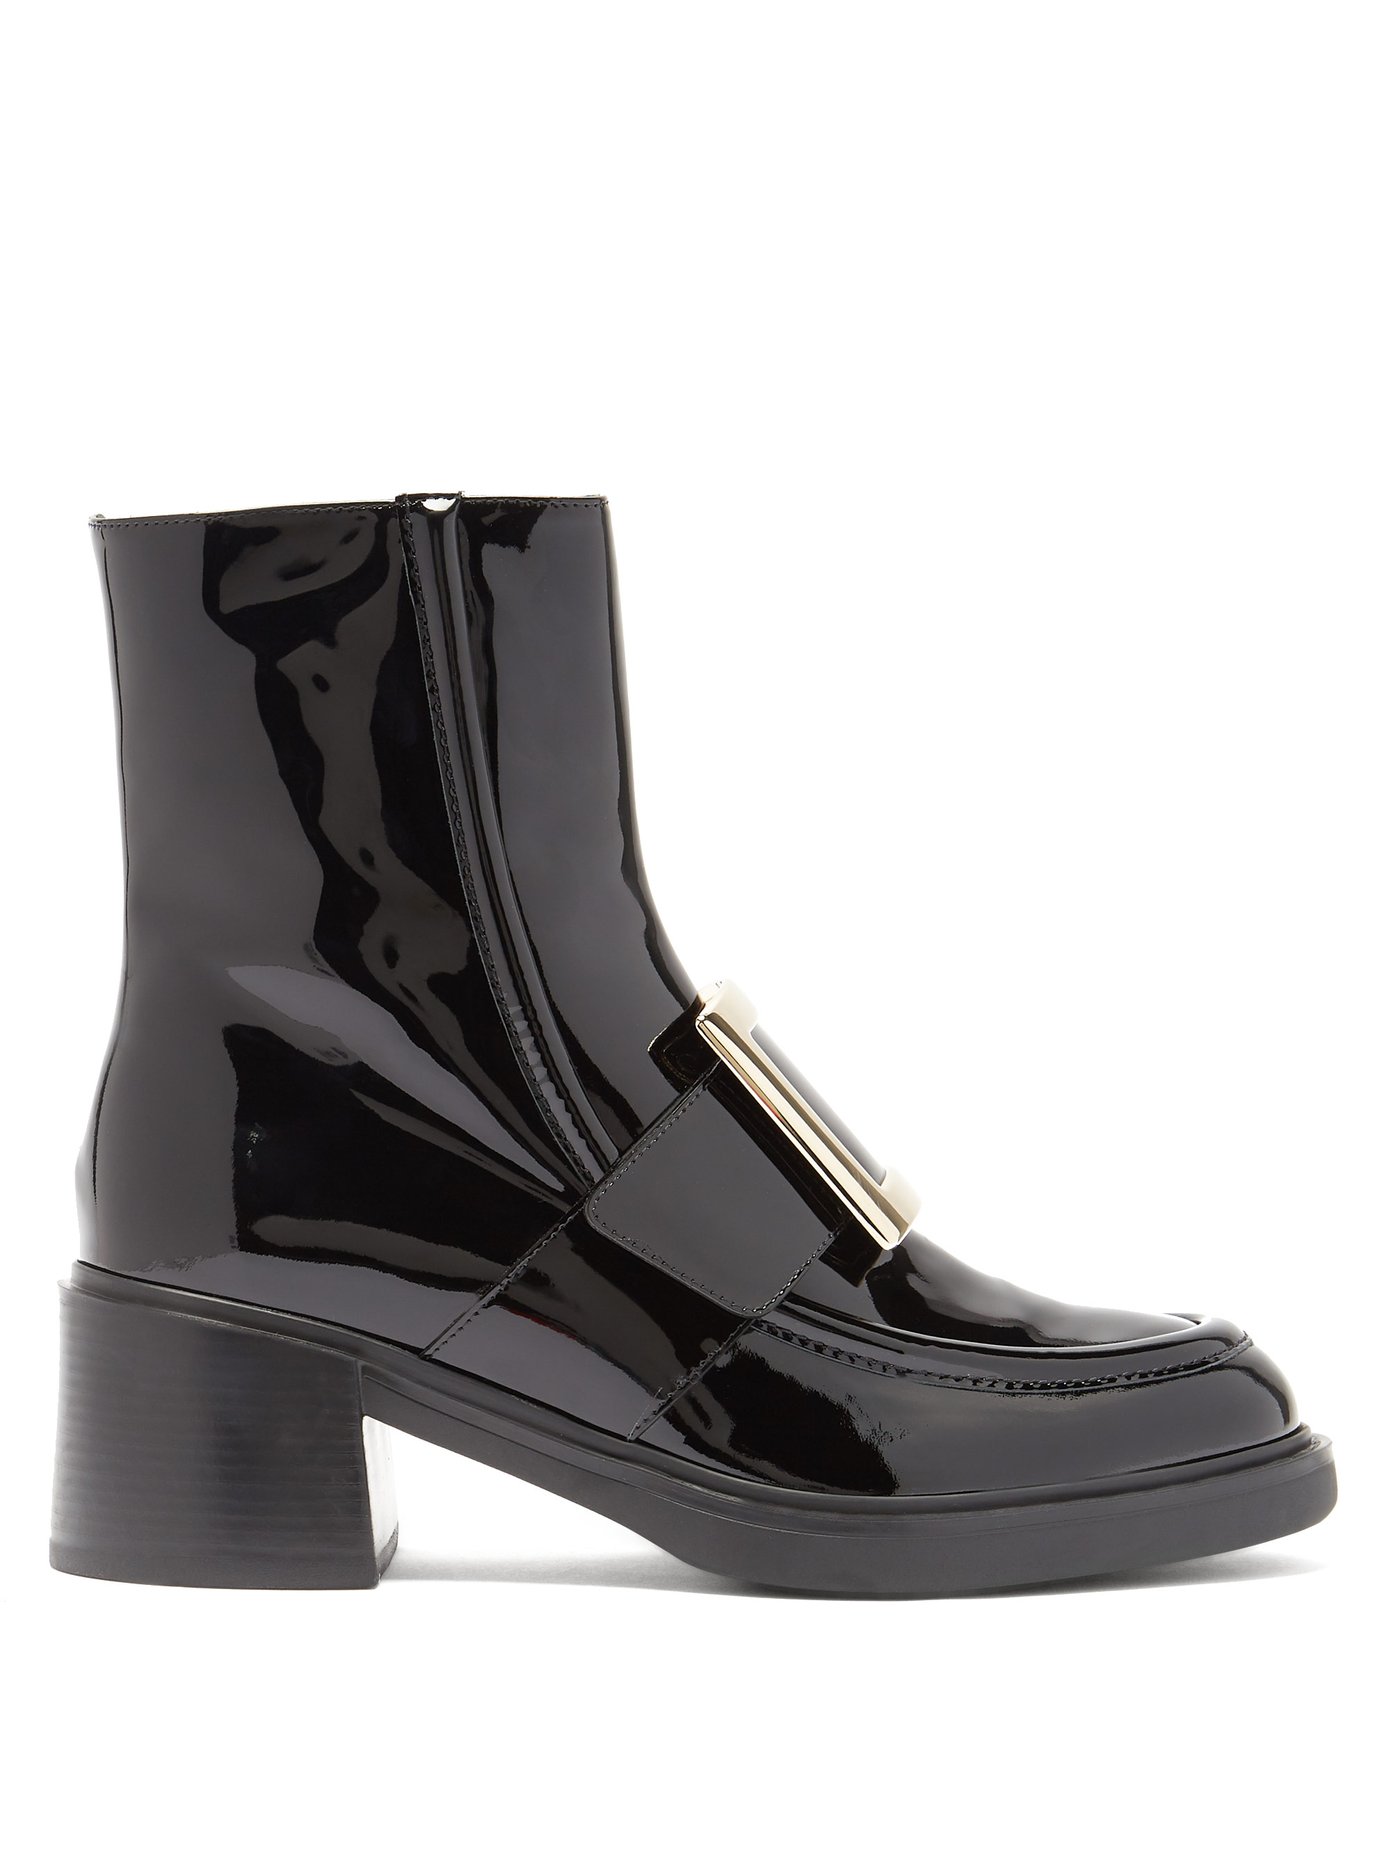 patent leather ankle boots uk